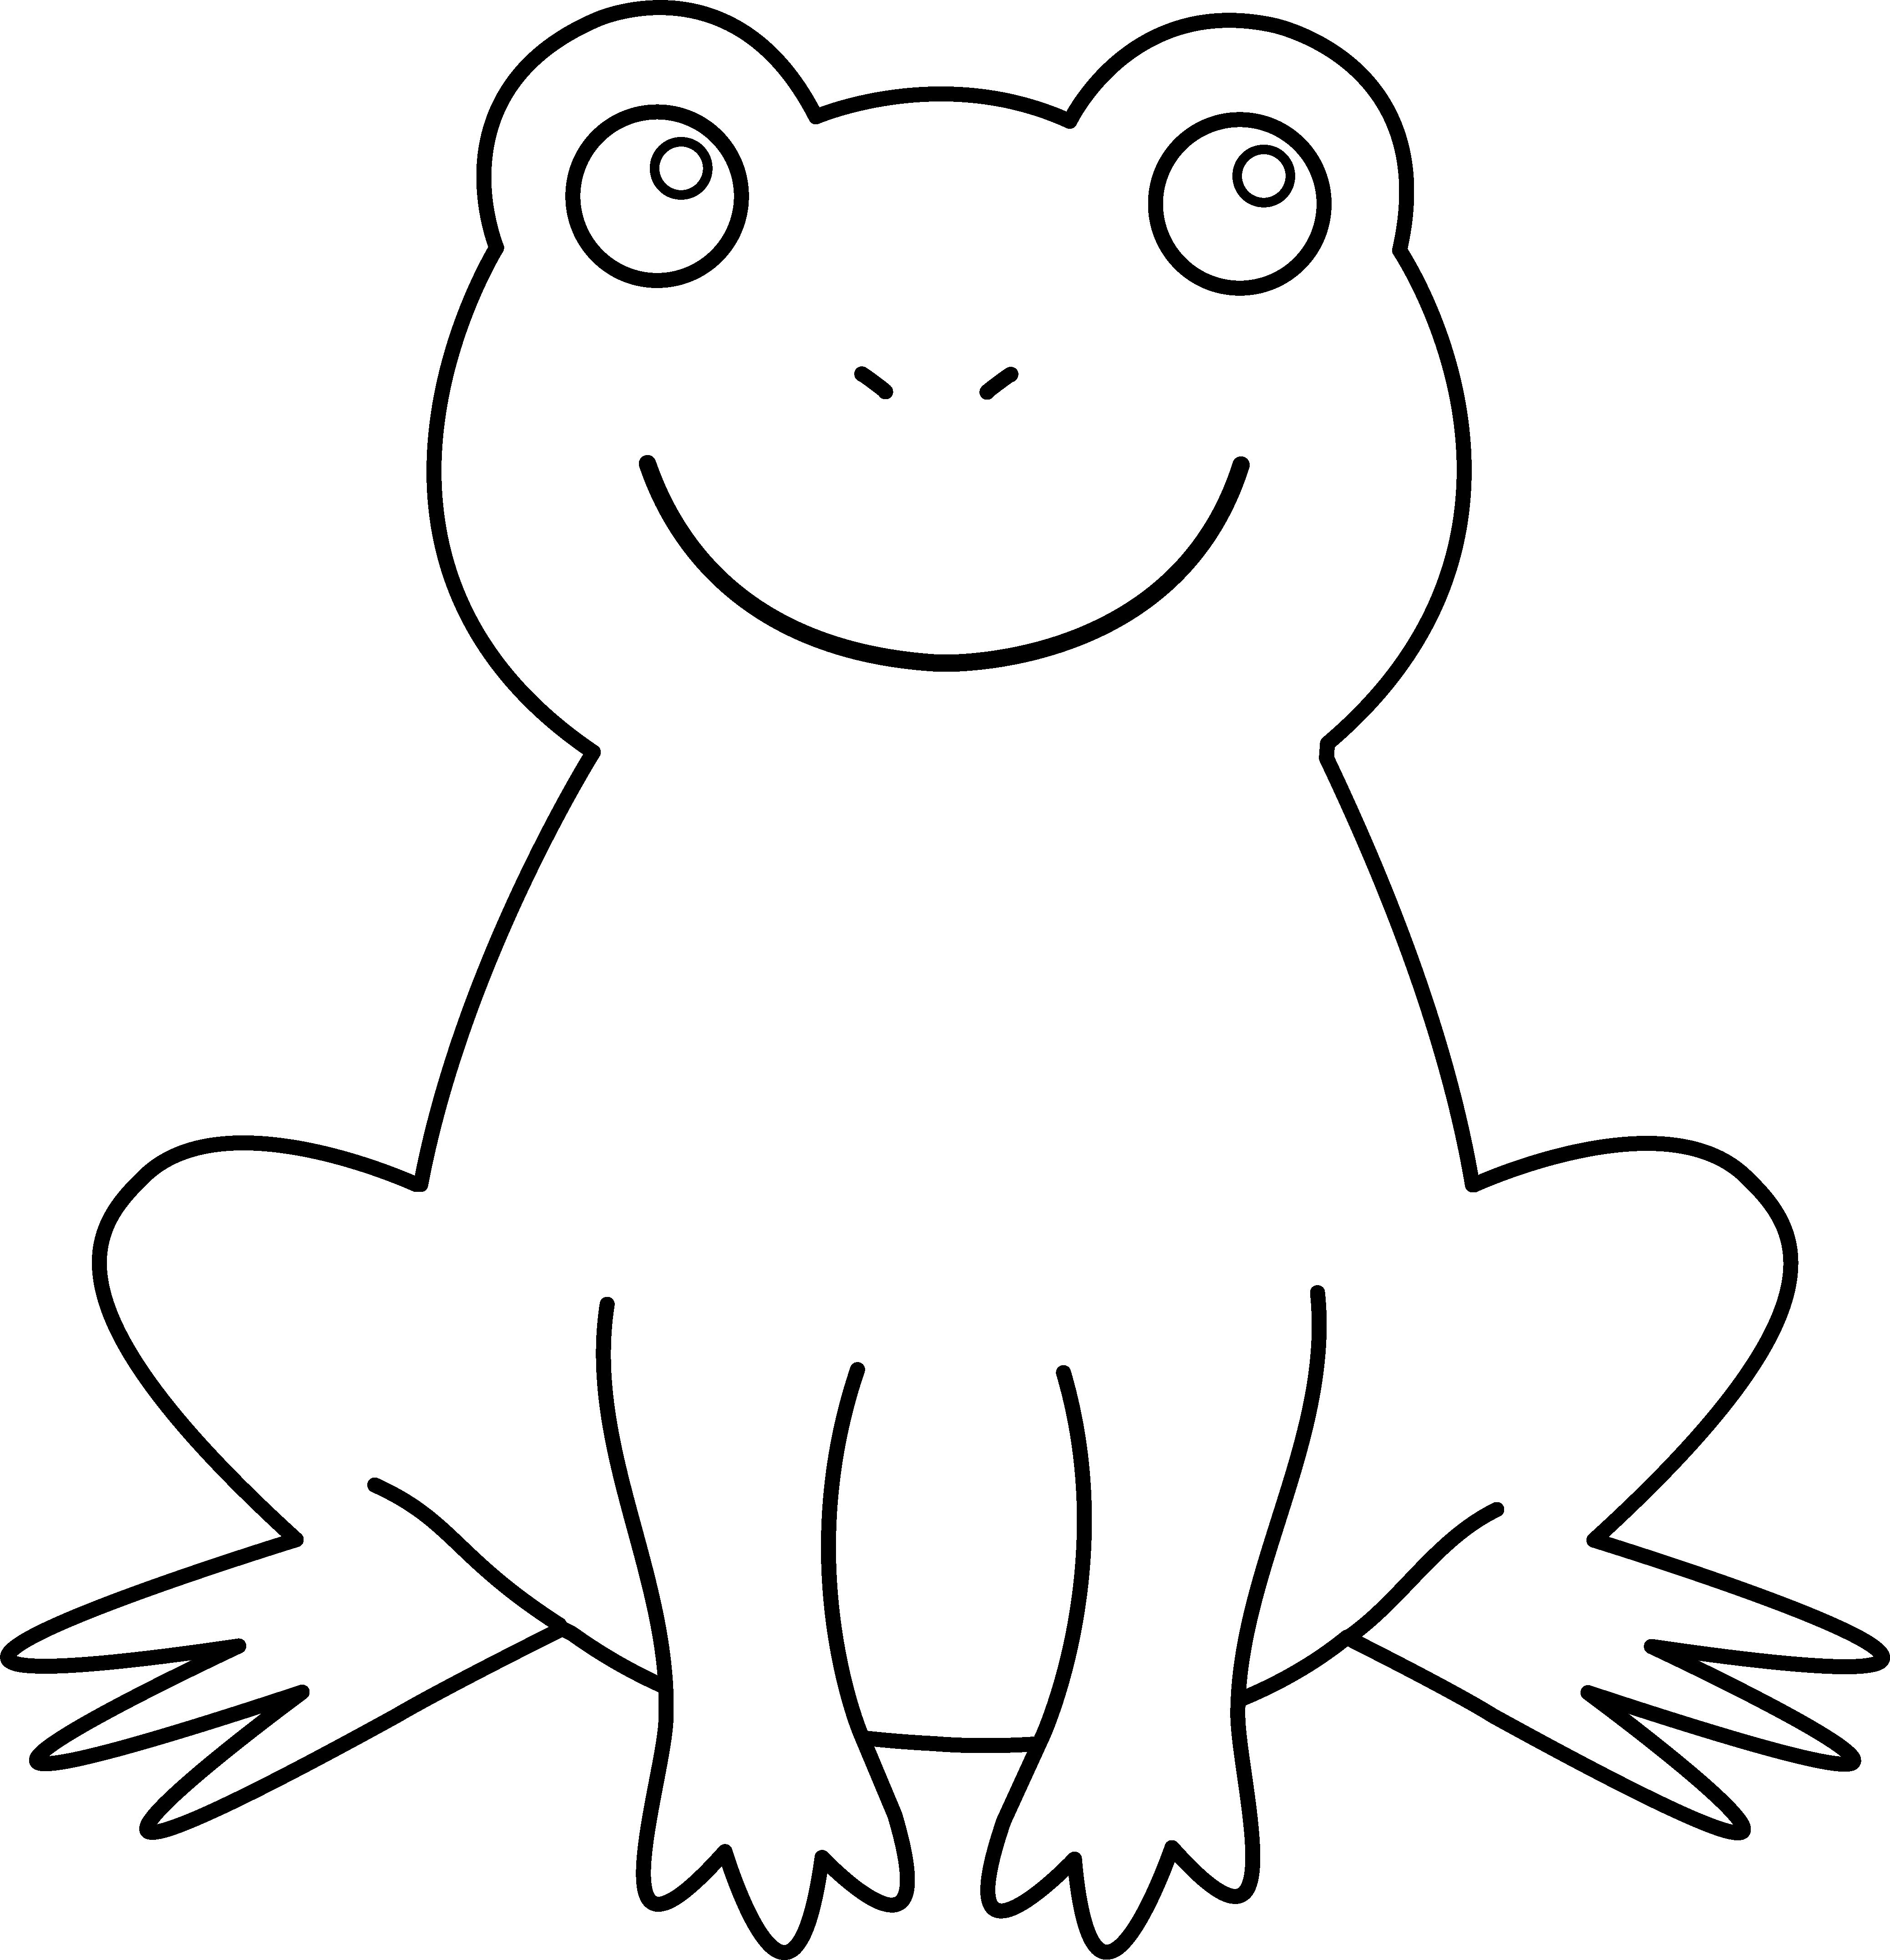 frog-outline-cliparts-co